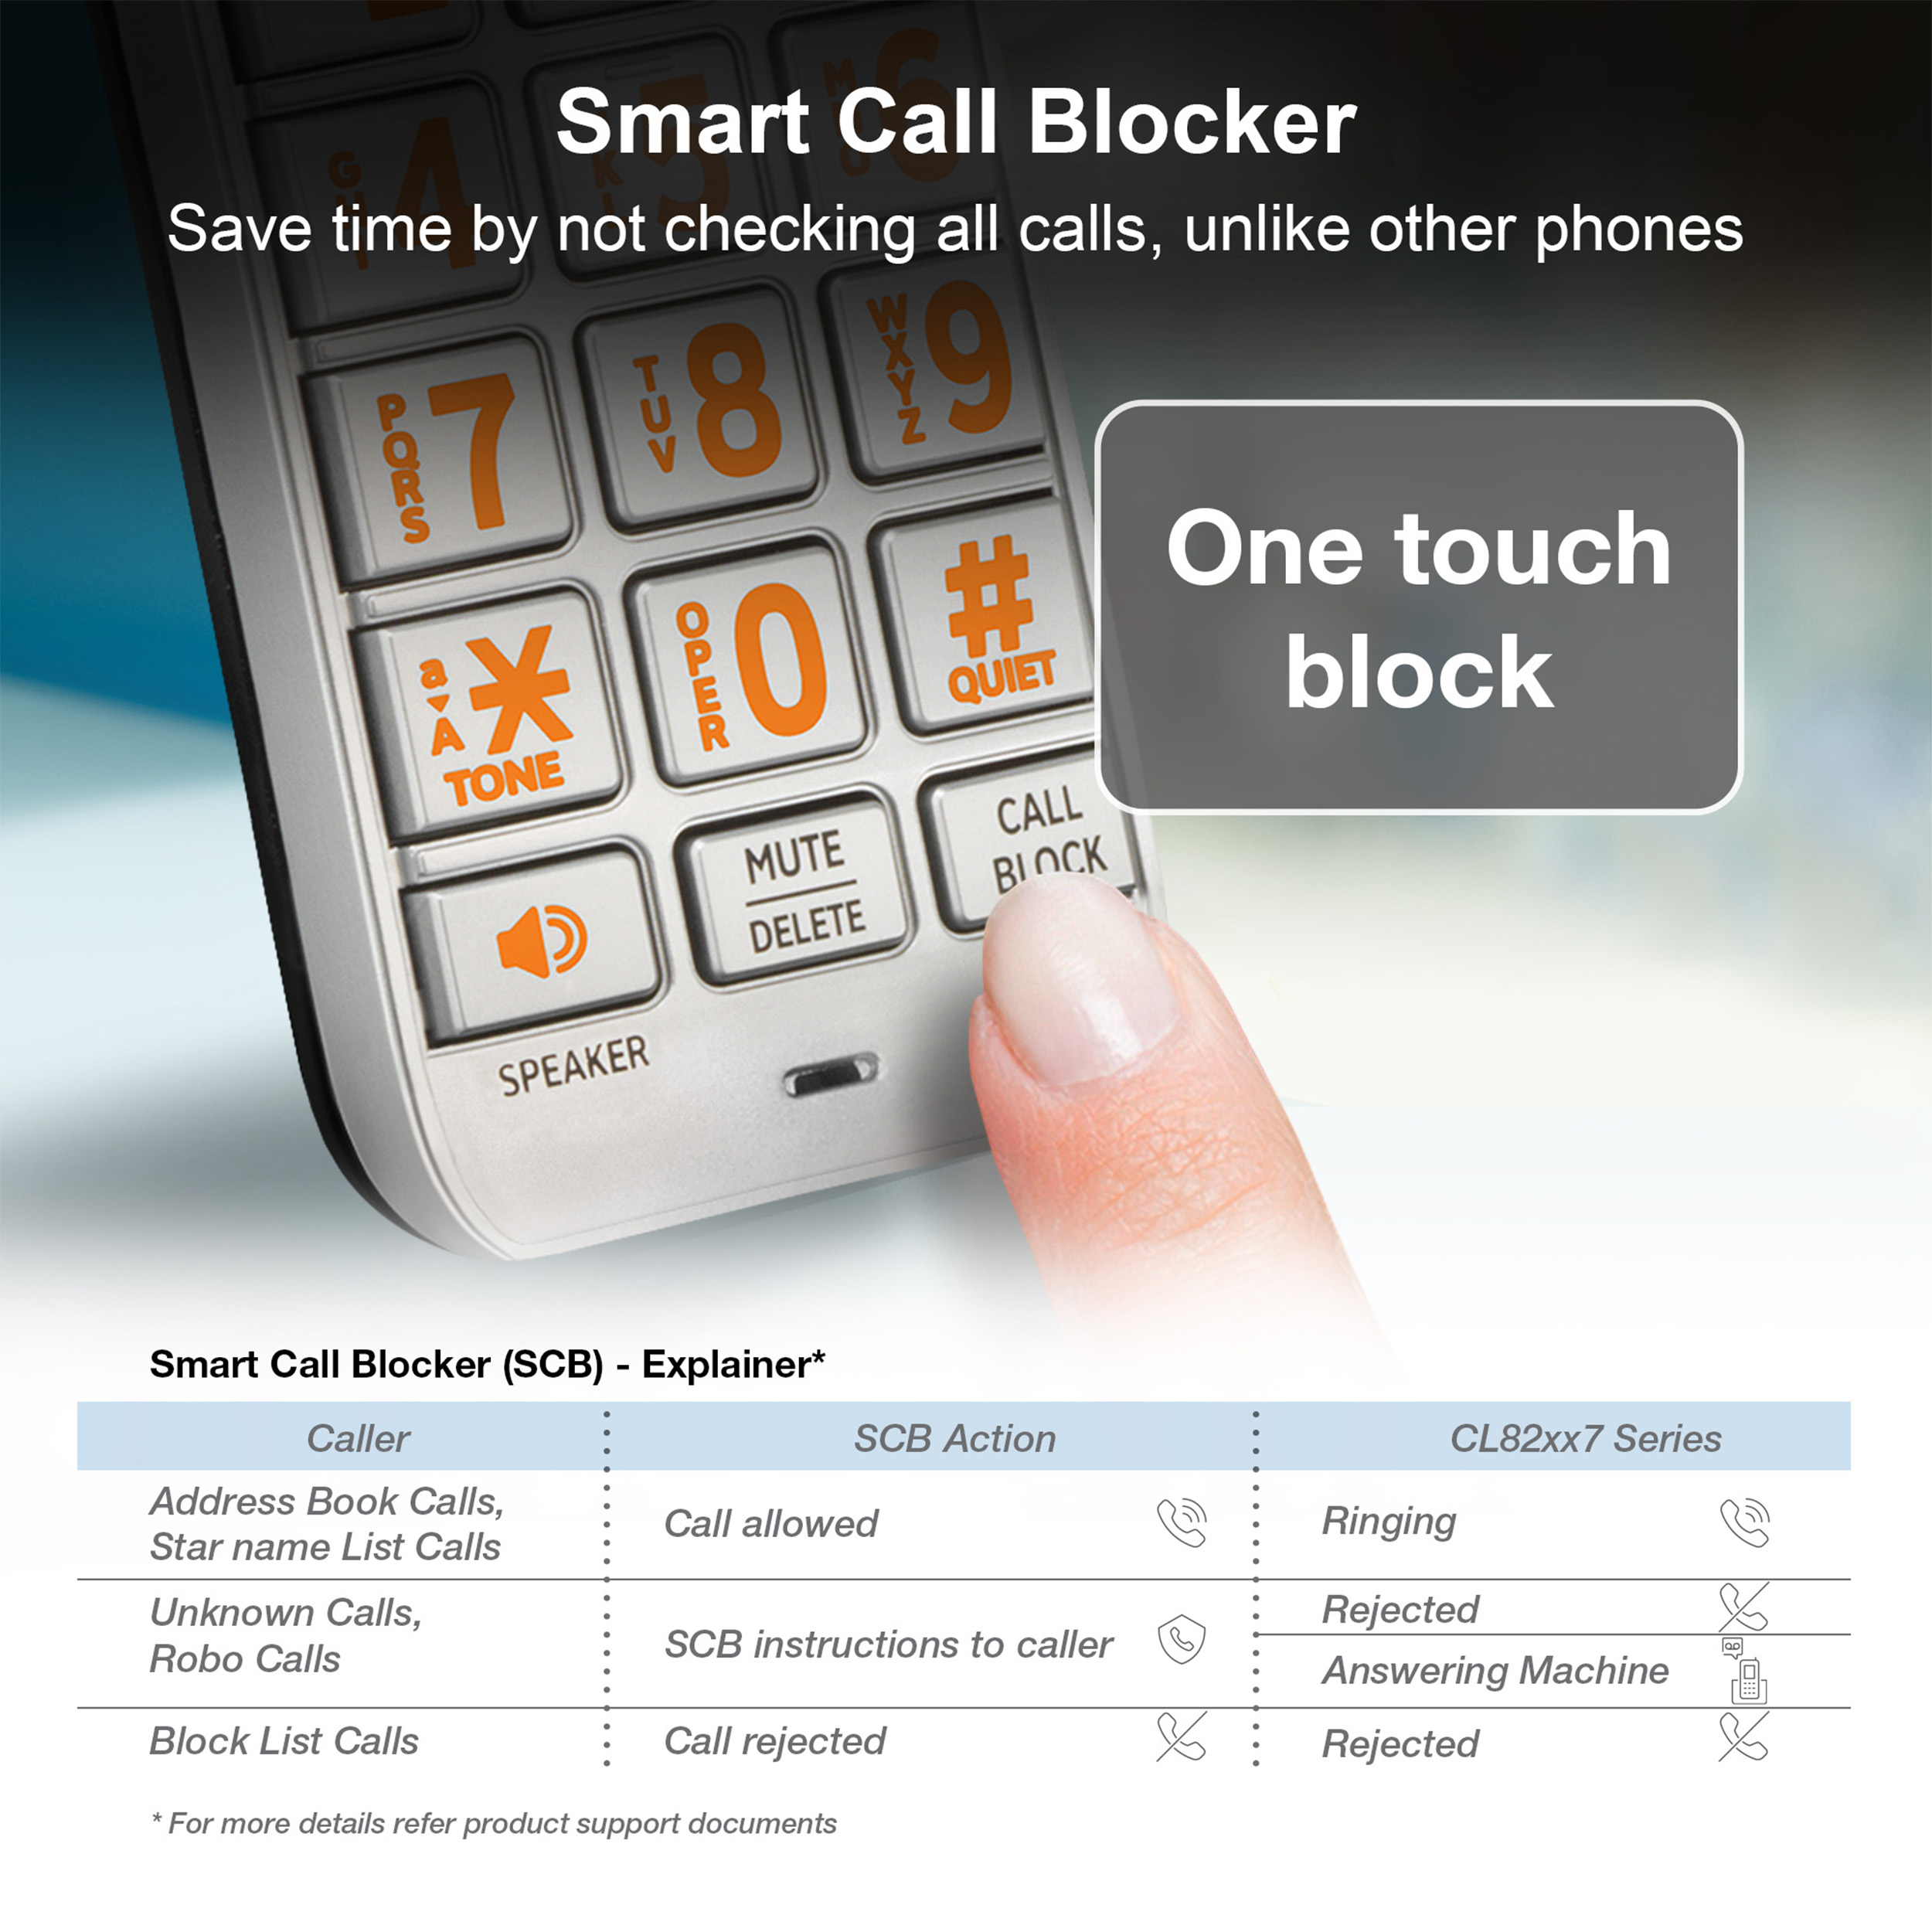 4 handset phone system with smart call blocker - view 4